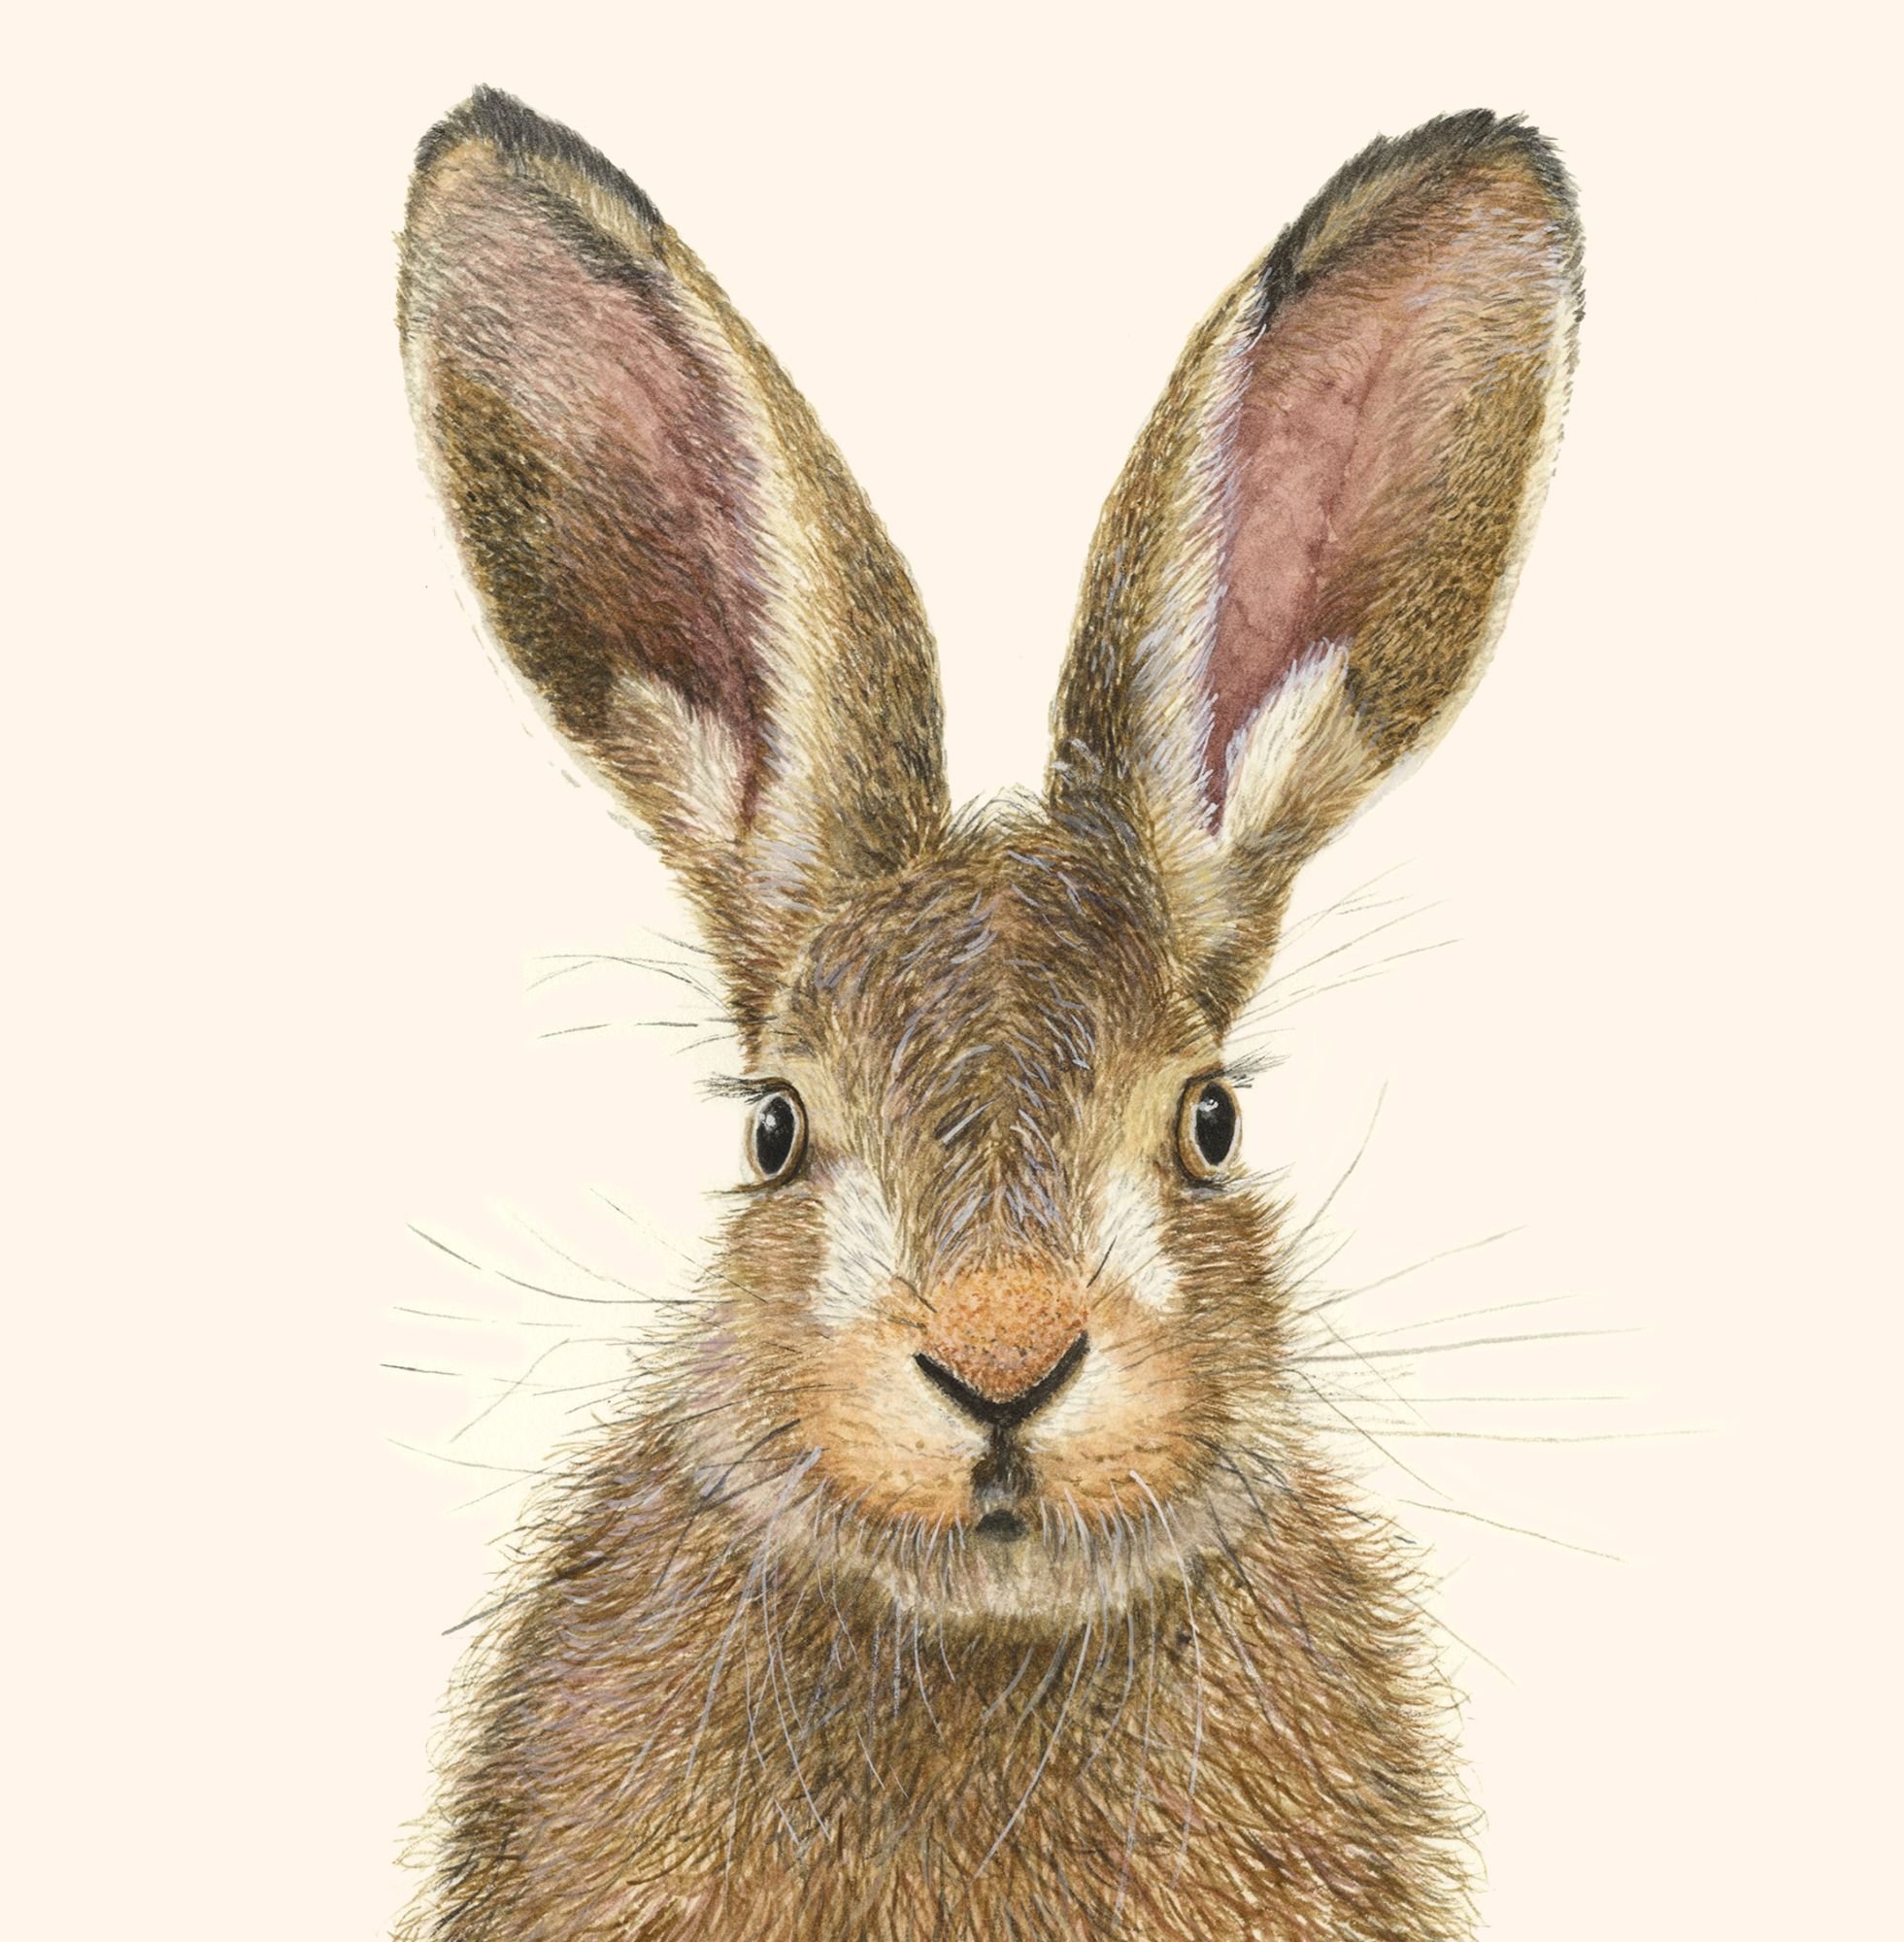 How to paint a Hare